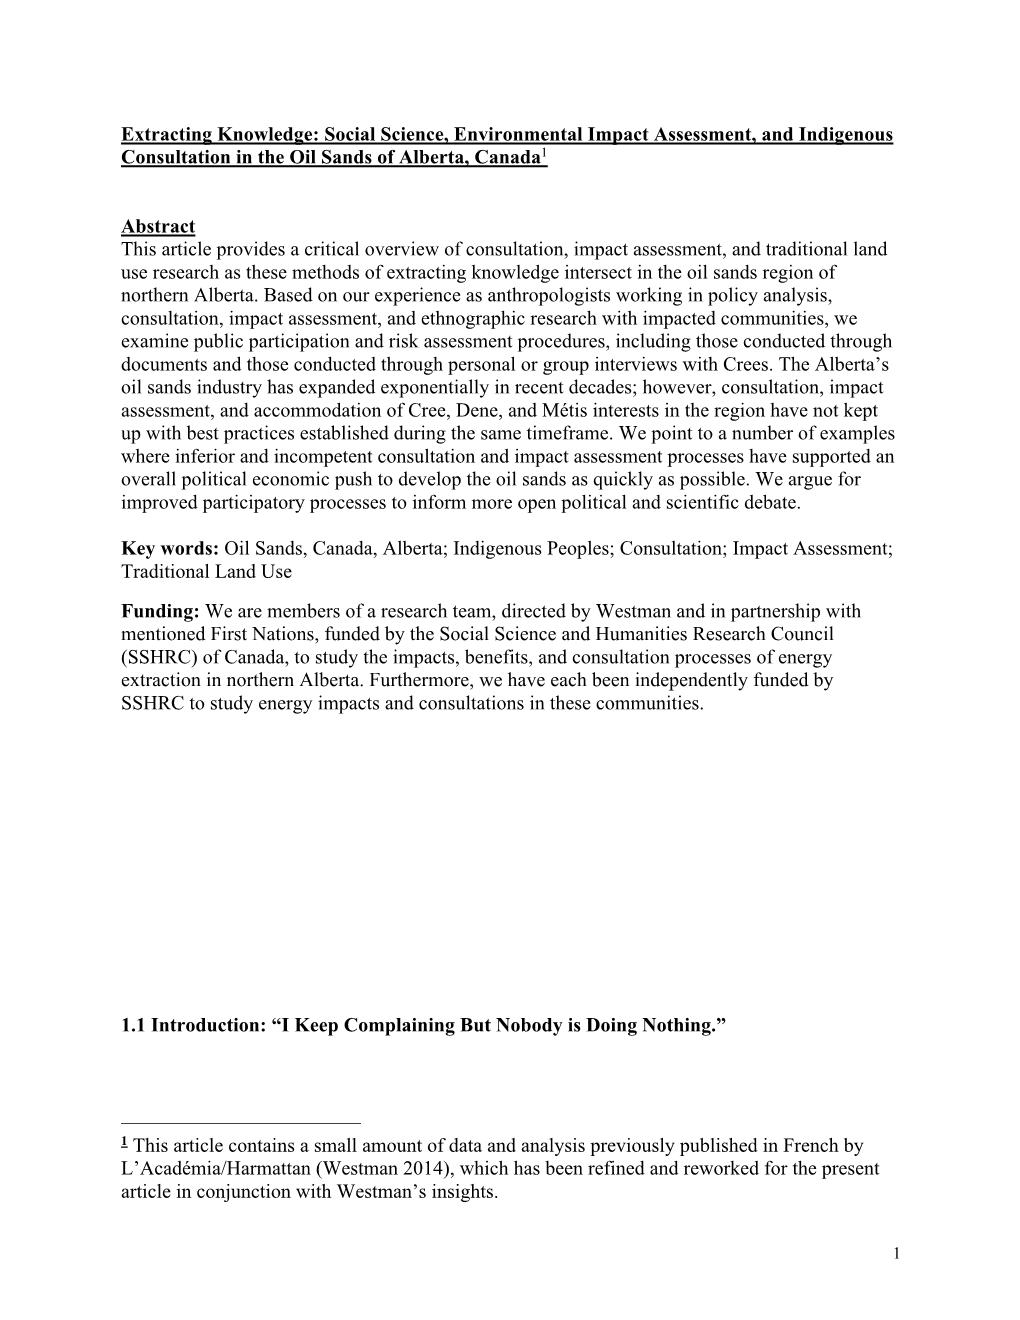 Extracting Knowledge: Social Science, Environmental Impact Assessment, and Indigenous Consultation in the Oil Sands of Alberta, Canada1